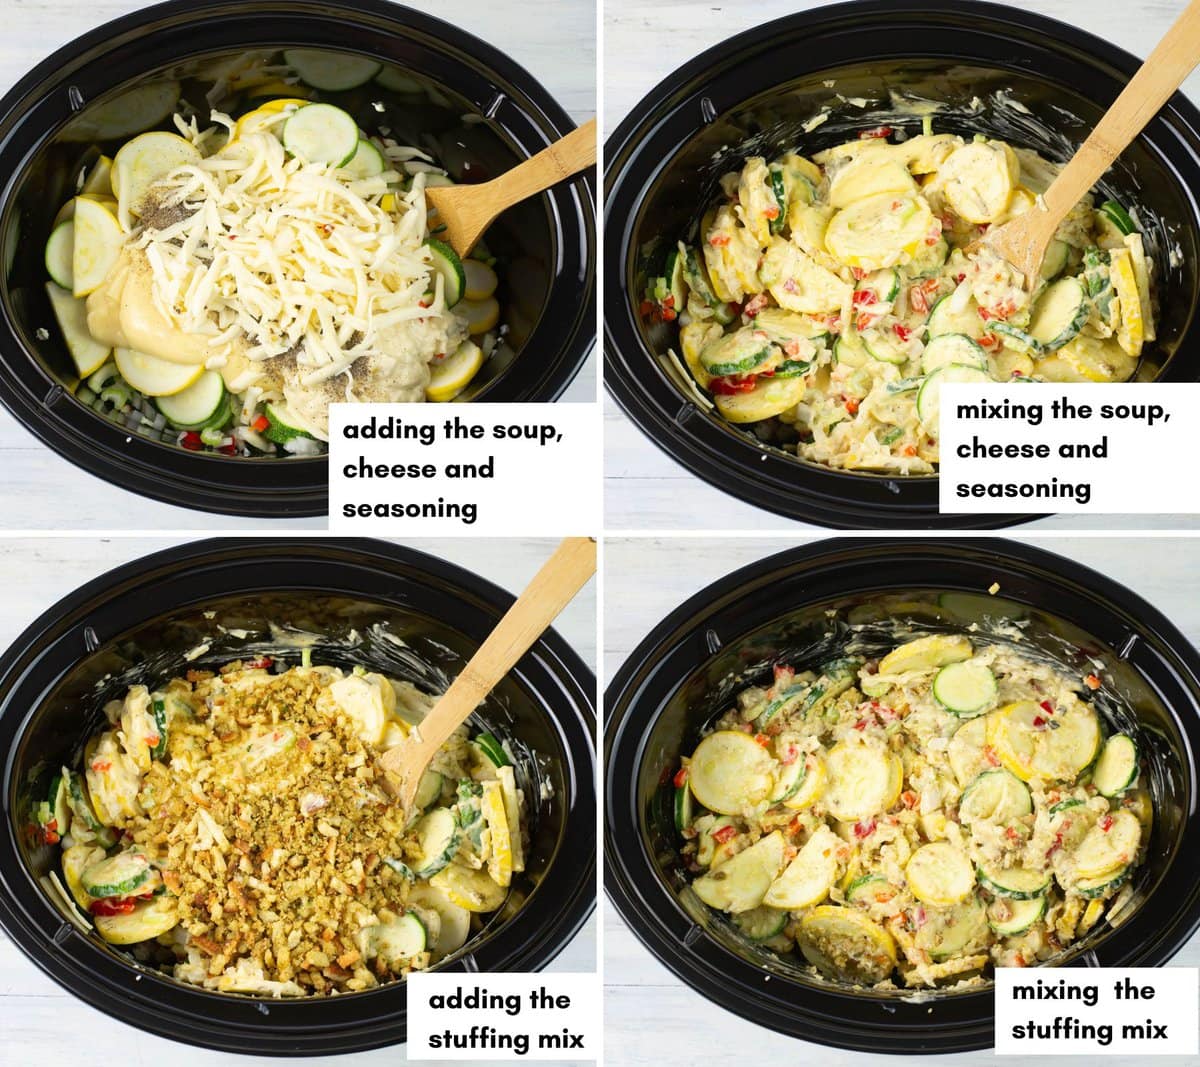 Mixing the crock pot casserole ingredients in 4 steps with photos.